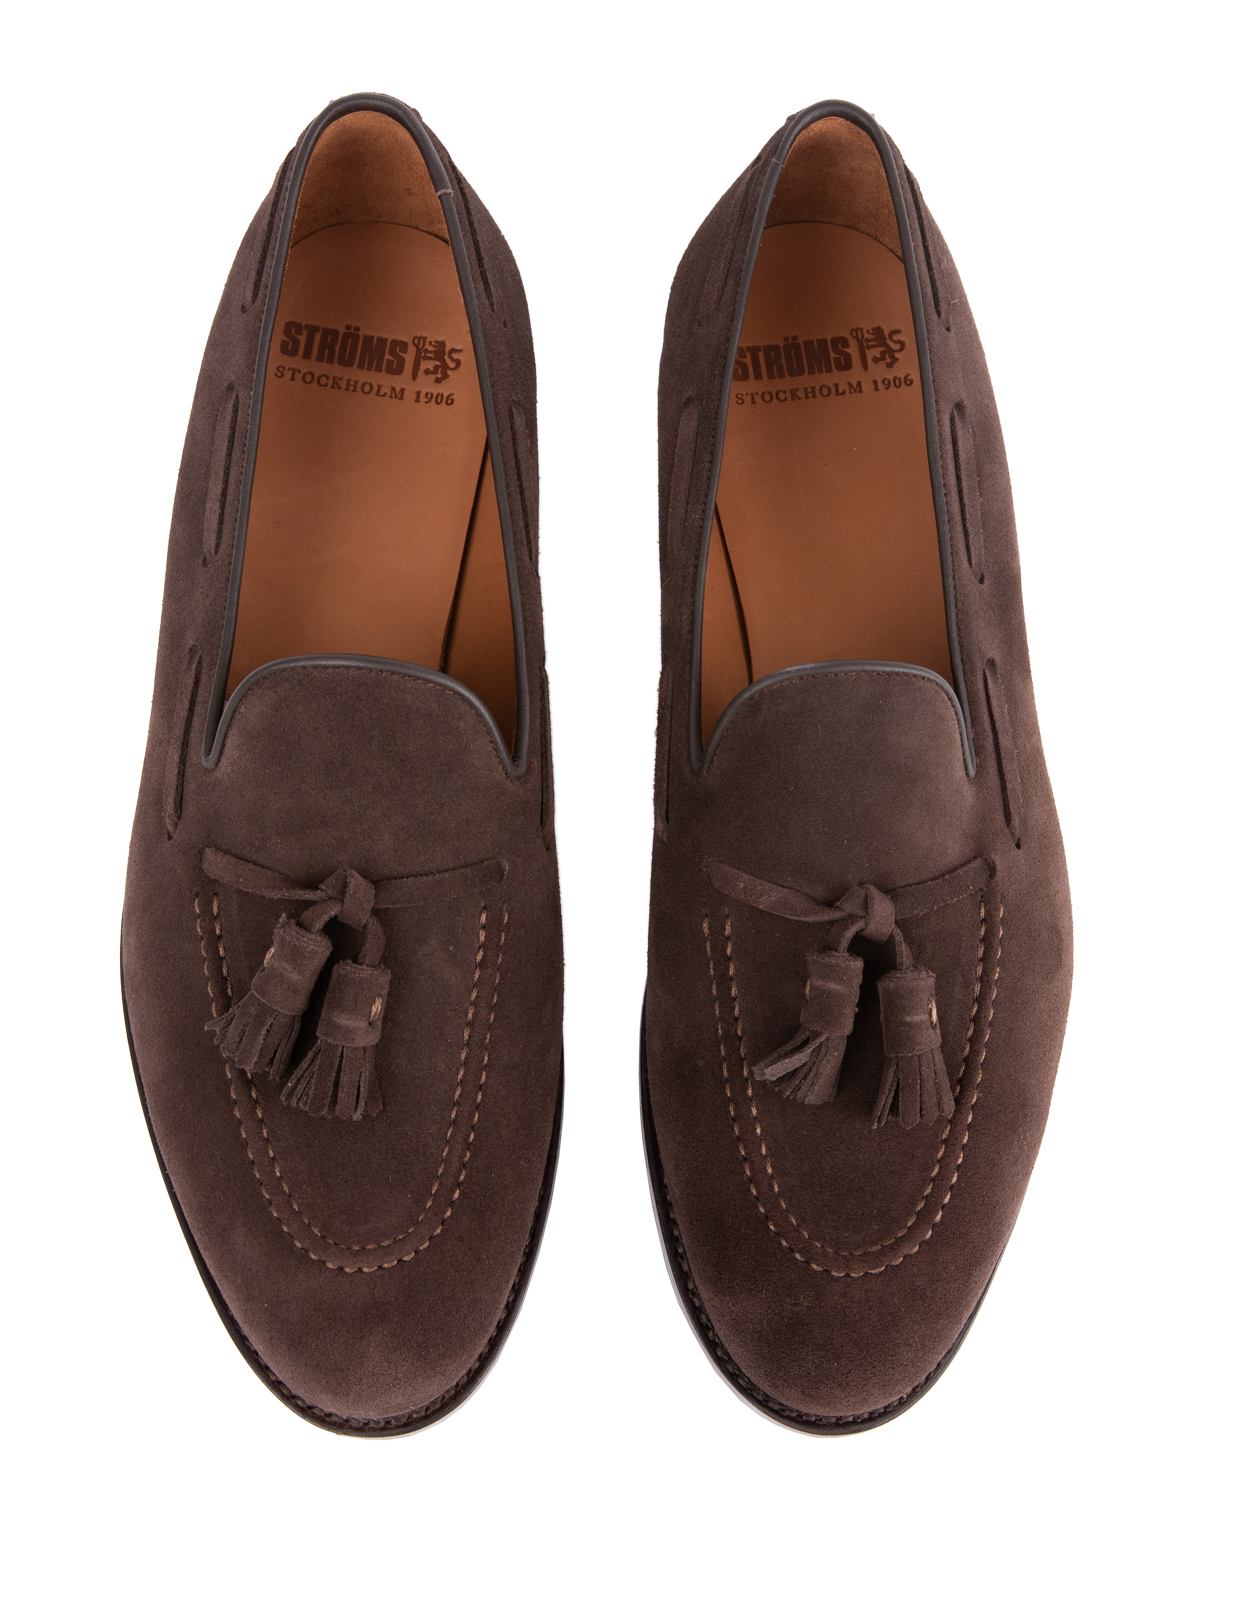 Tassel Loafers Suede Bitter Chocolate Stl 9.5